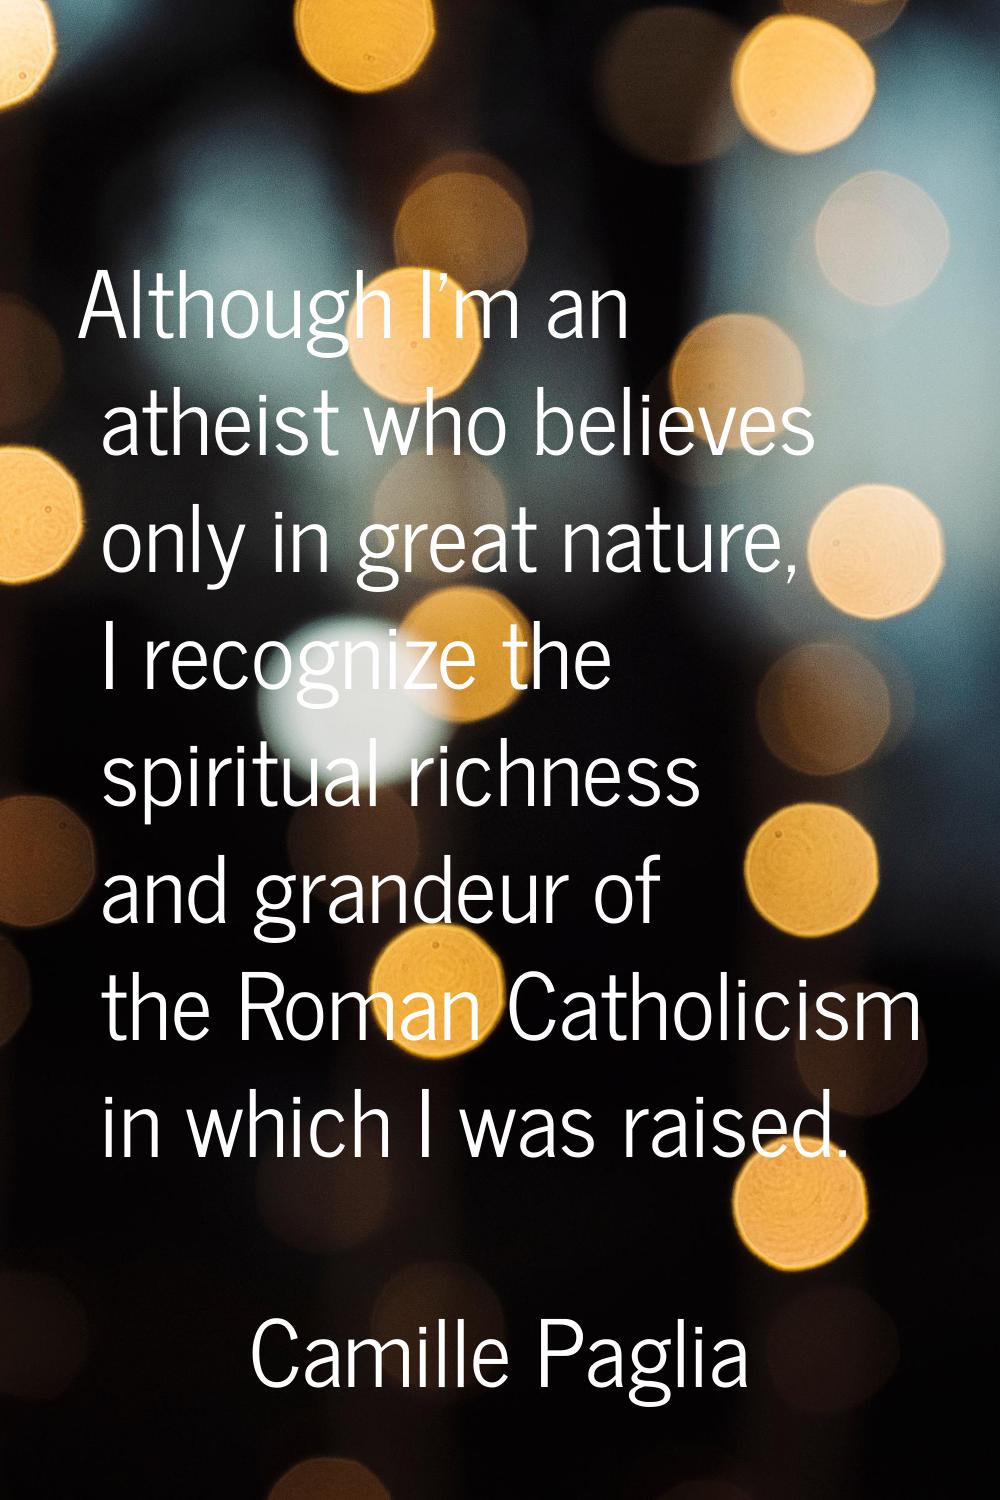 Although I'm an atheist who believes only in great nature, I recognize the spiritual richness and g